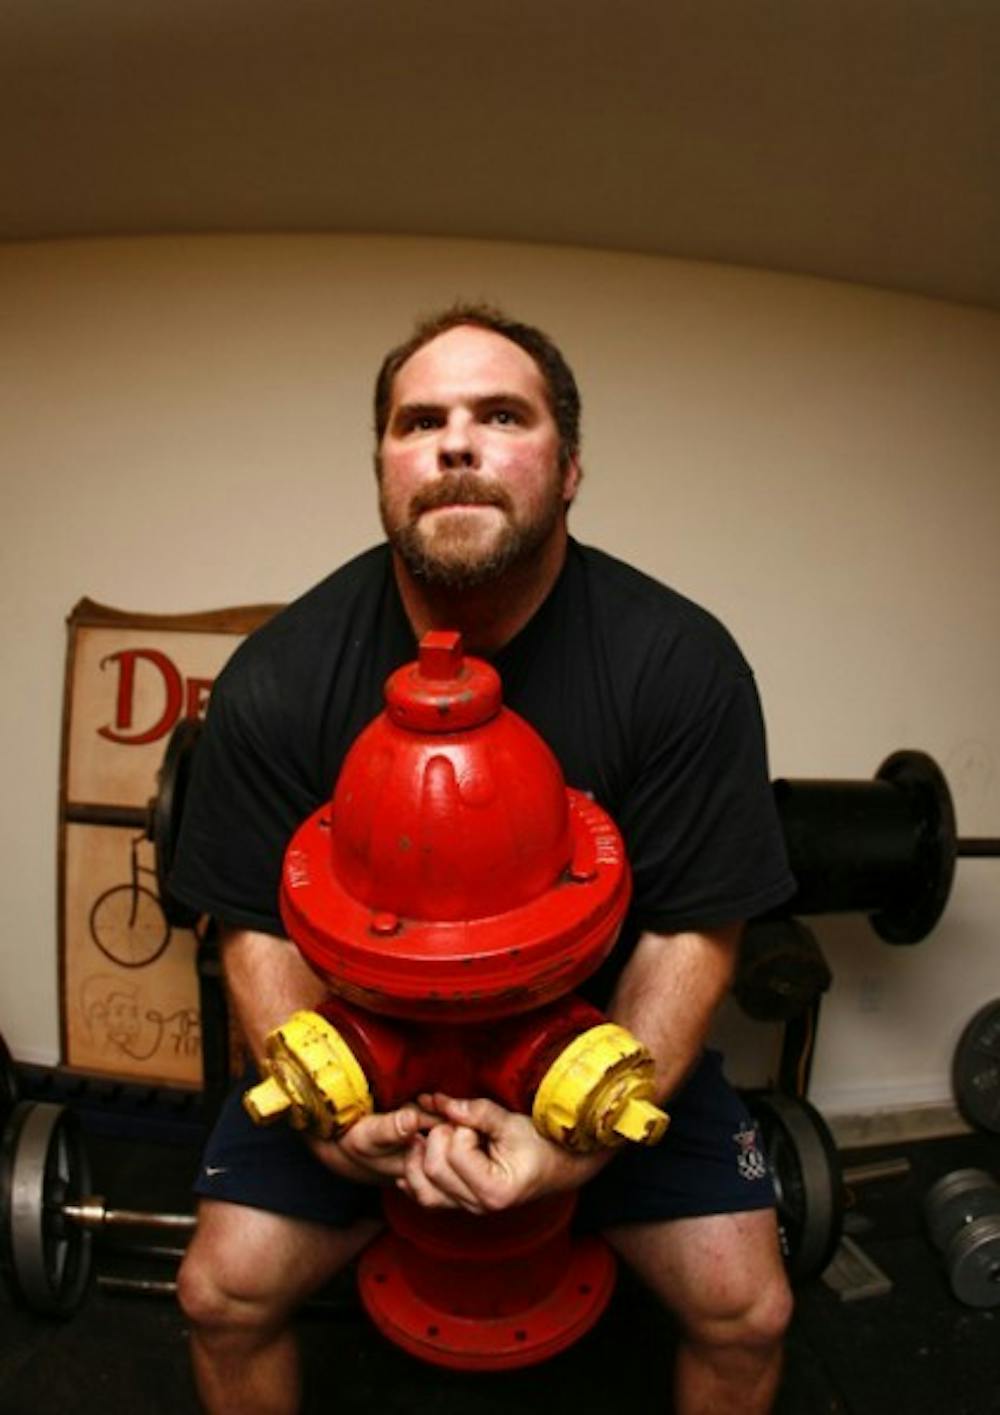 <p>Matt DeLancey paid $150 to have this fire hydrant shipped to his home. “It’s not even heavy,” DeLancey said. “This is nothing.”</p>